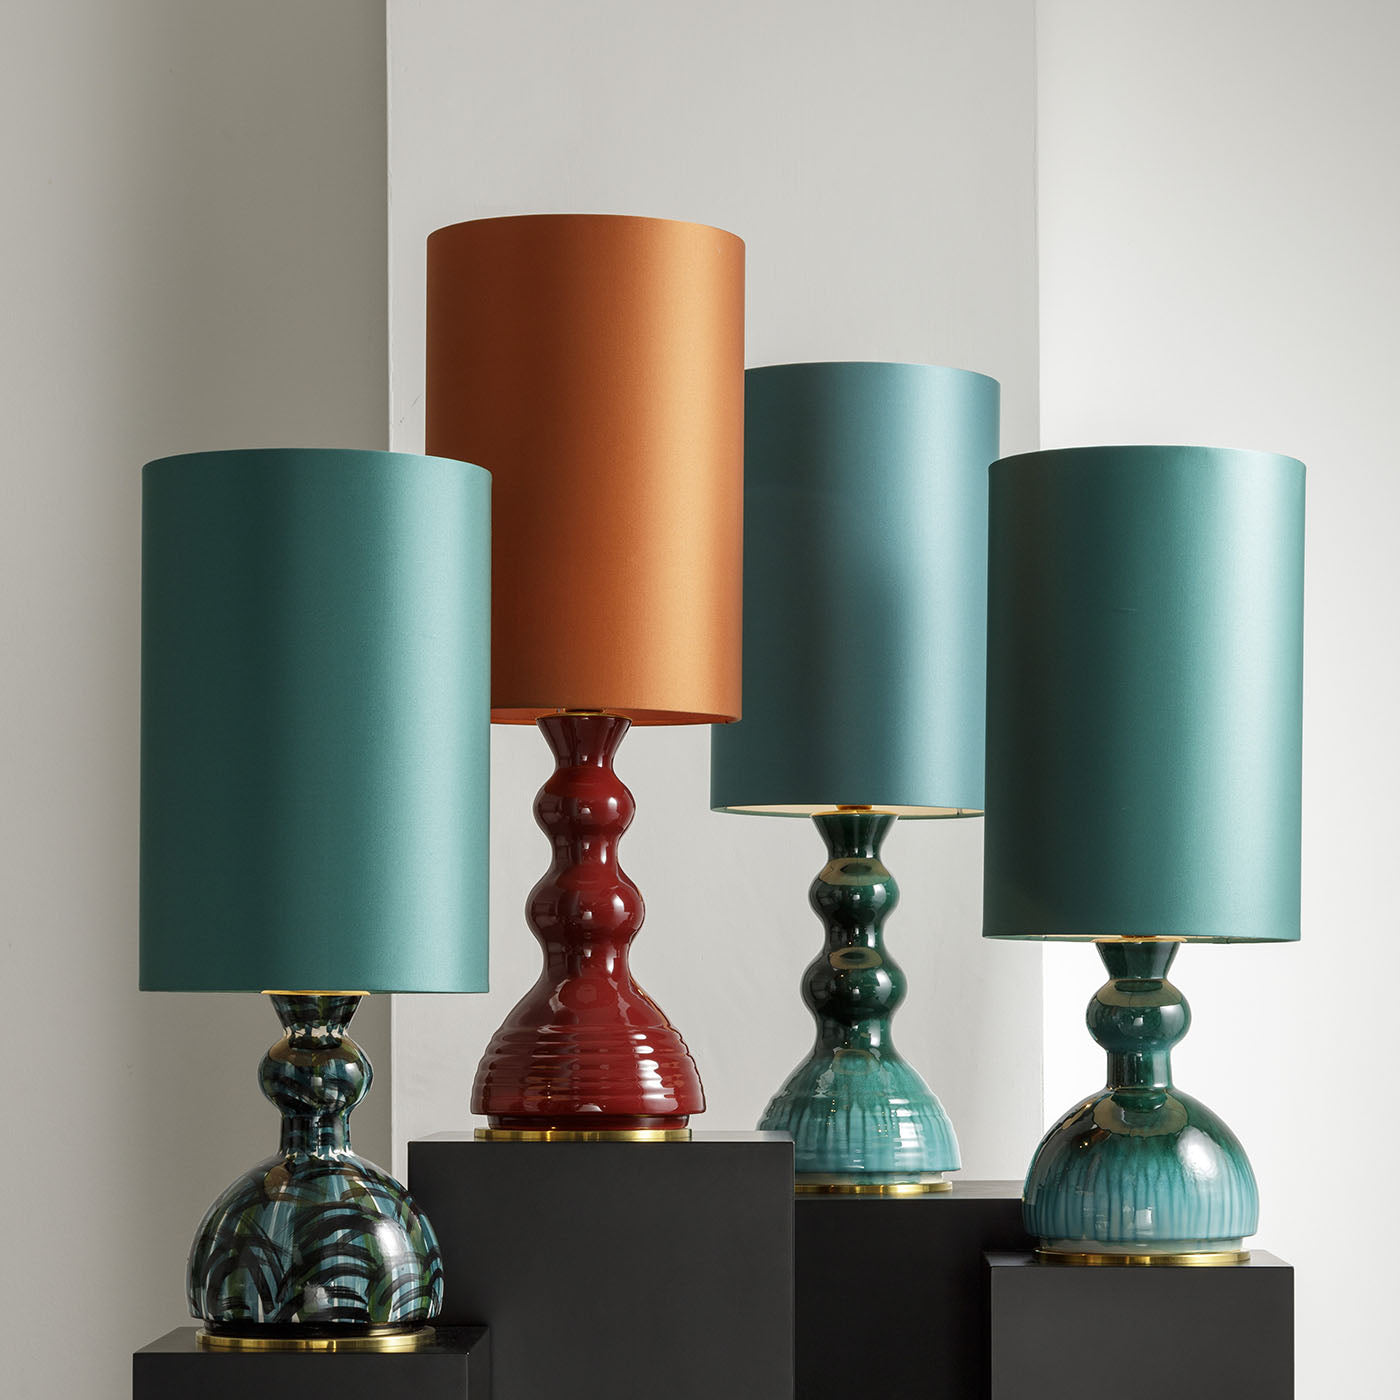 CL2122/VG Allegra Green & Turquoise Table Lamp - Alternative view 2